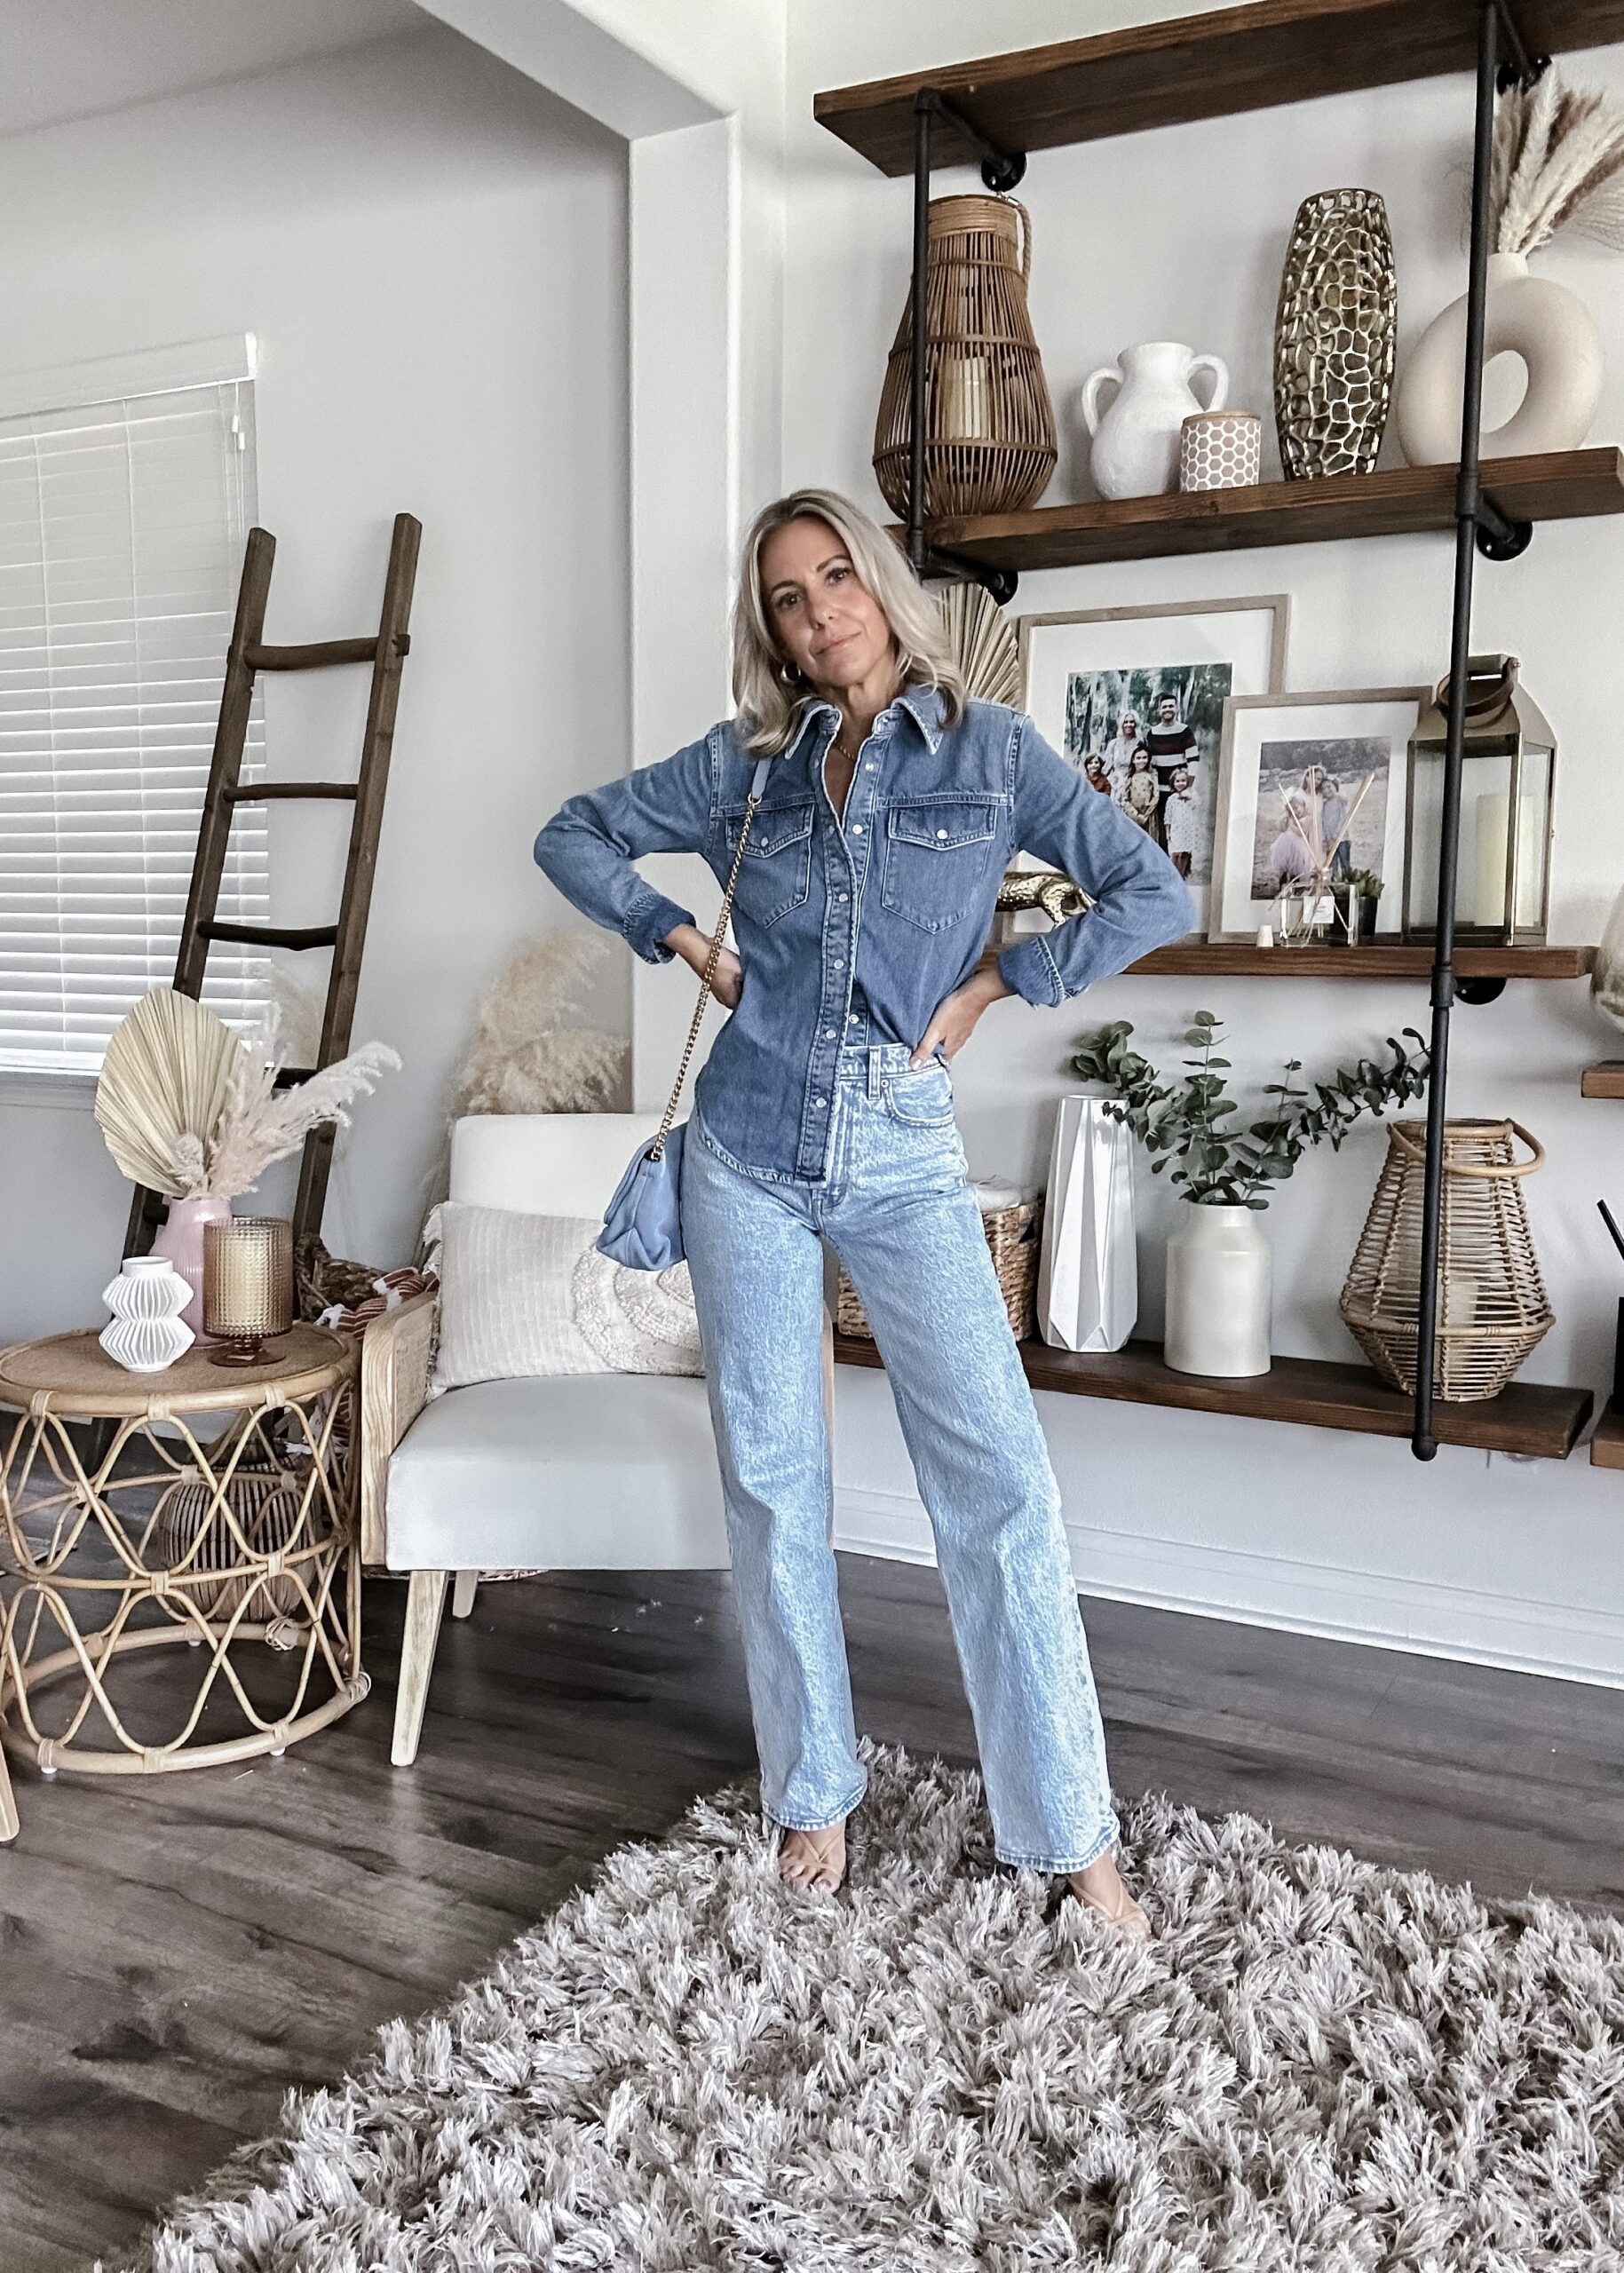 TRENDING NOW: DENIM-Jaclyn De Leon style. Denim is trending for Spring. Everything from classic wide leg jeans to denim vests + jumpsuits and everything in between. Check out how I style the denim trend.